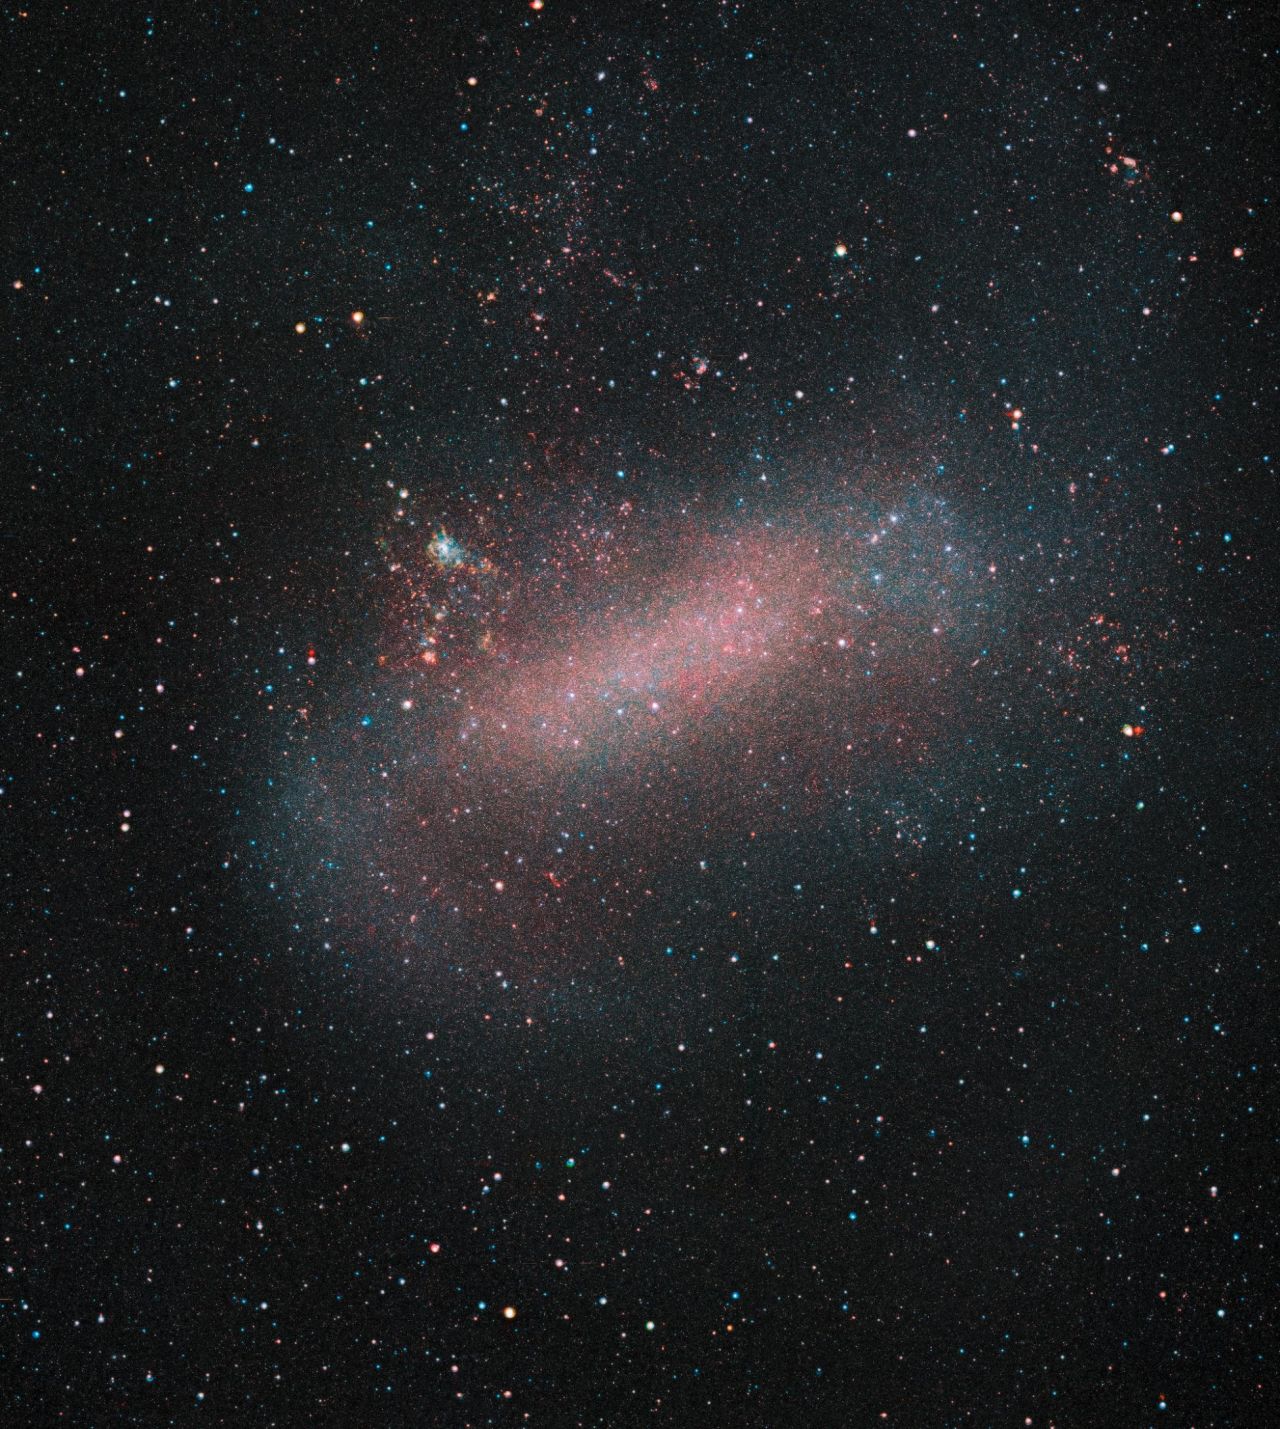 The European Southern Observatory's VISTA telescope captured a stunning image of the Large Magellanic Cloud, one of our nearest galactic neighbors. The near-infrared capability of the telescope showcases millions of individual stars.